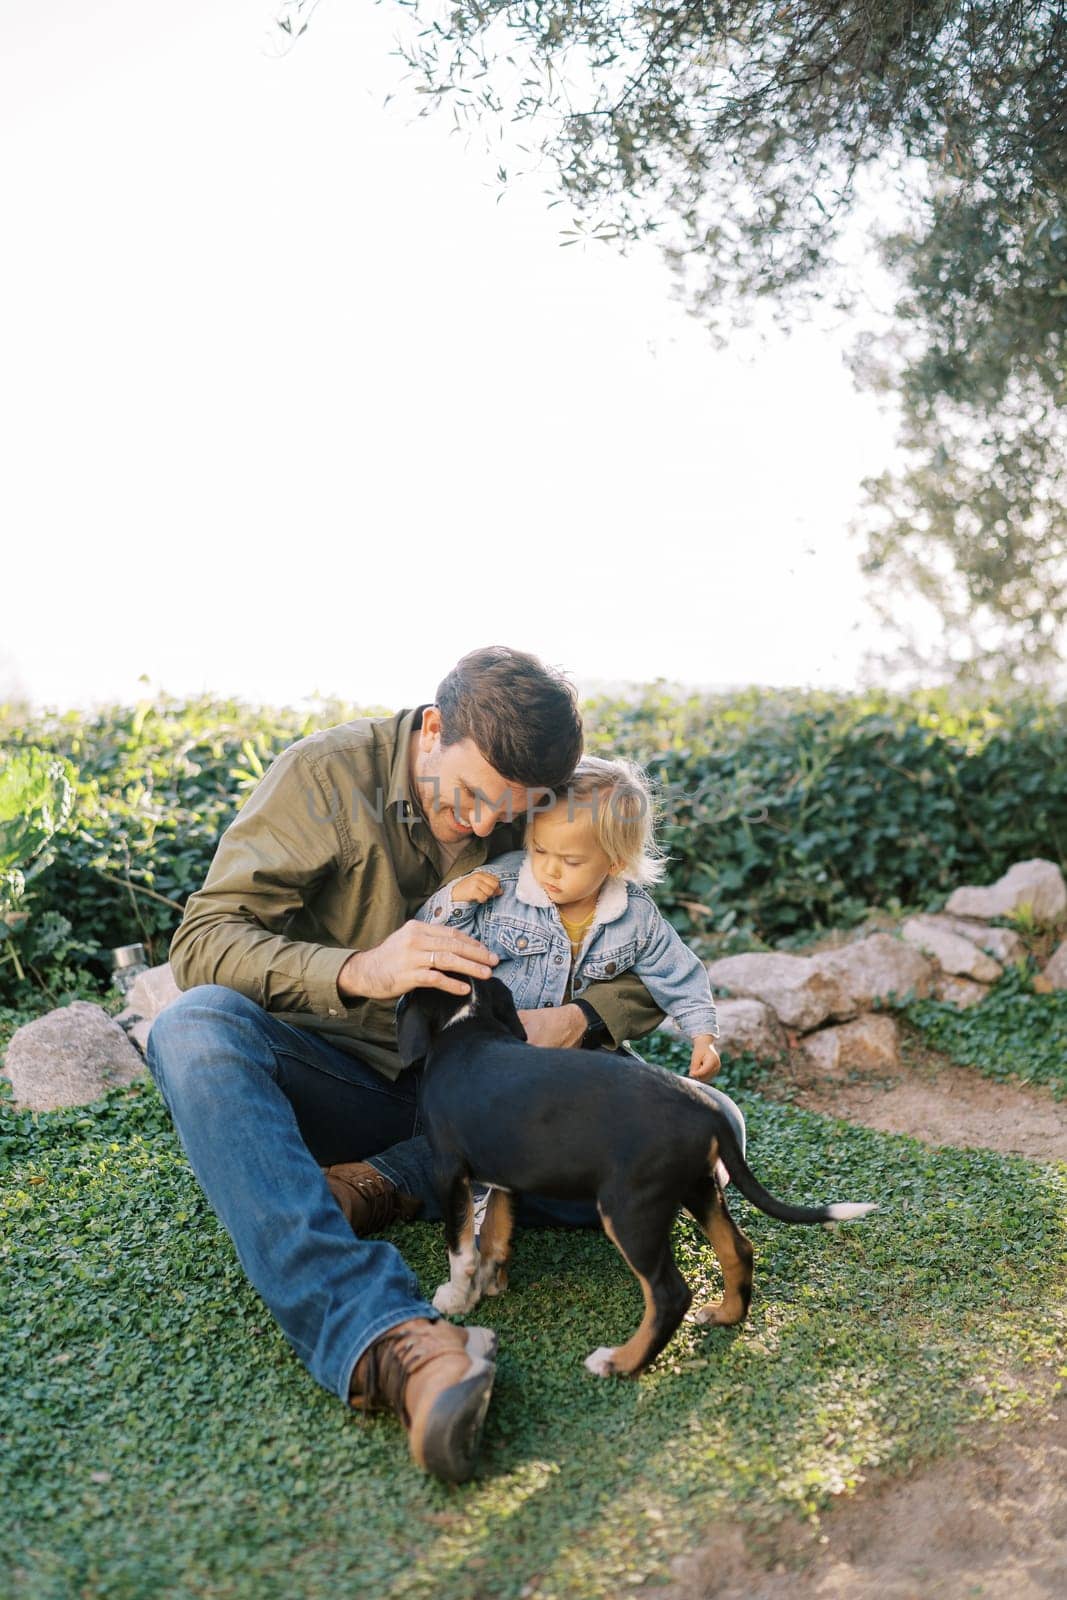 Smiling dad with a little girl in his arms sits on the lawn and pets a puppy by Nadtochiy